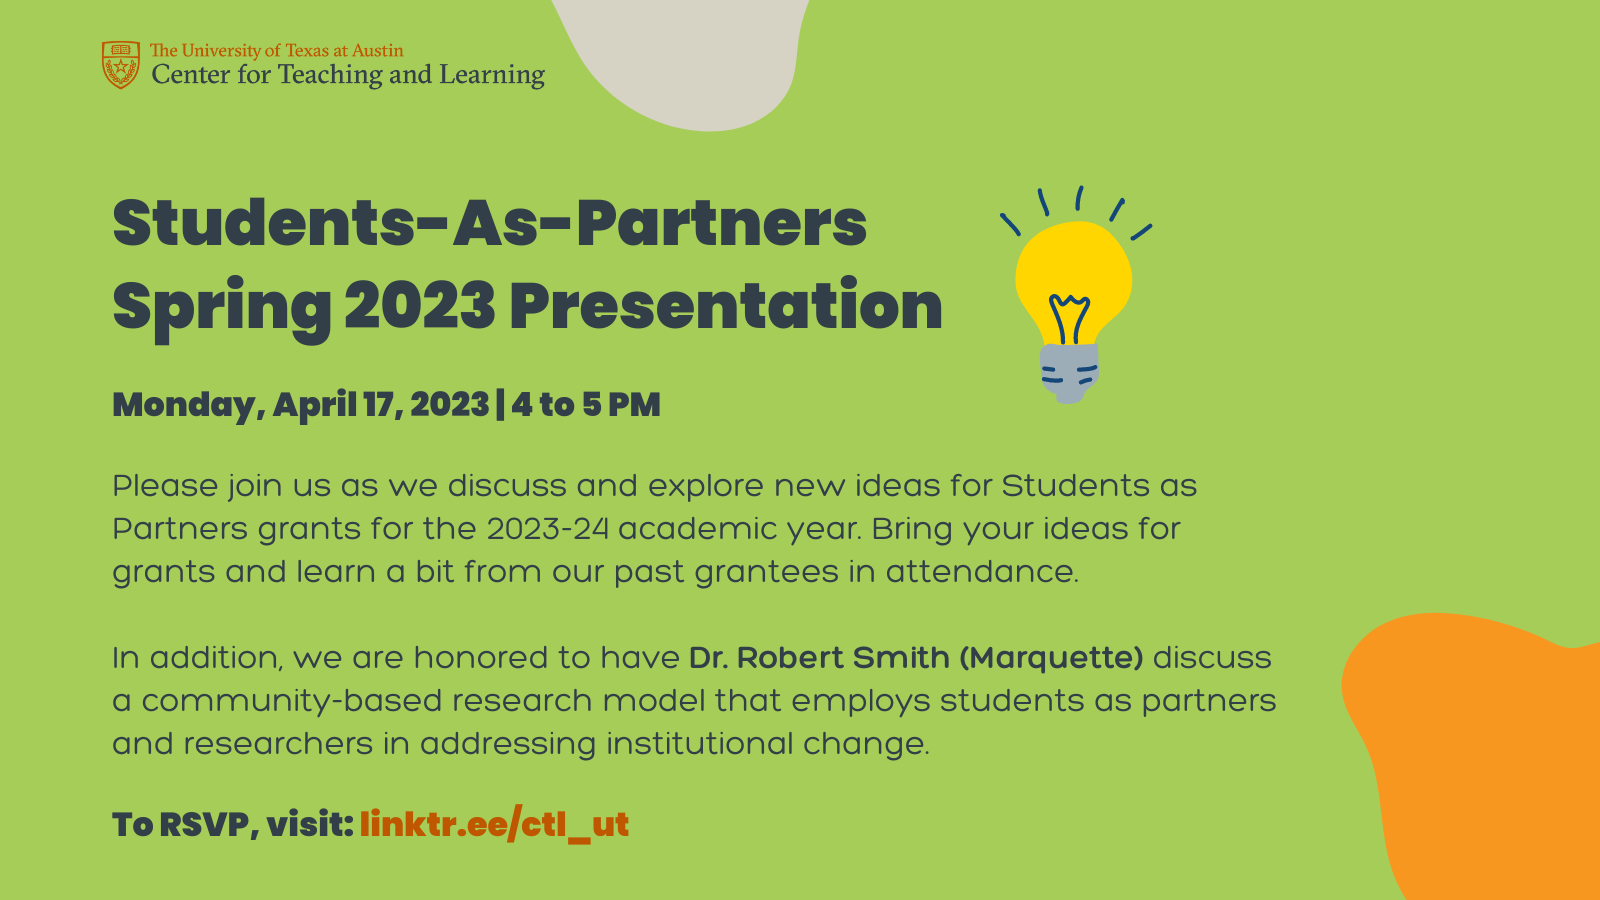 Students-As-Partners Spring 2023 Presentation information with a green background and a yellow lighbulb graphic